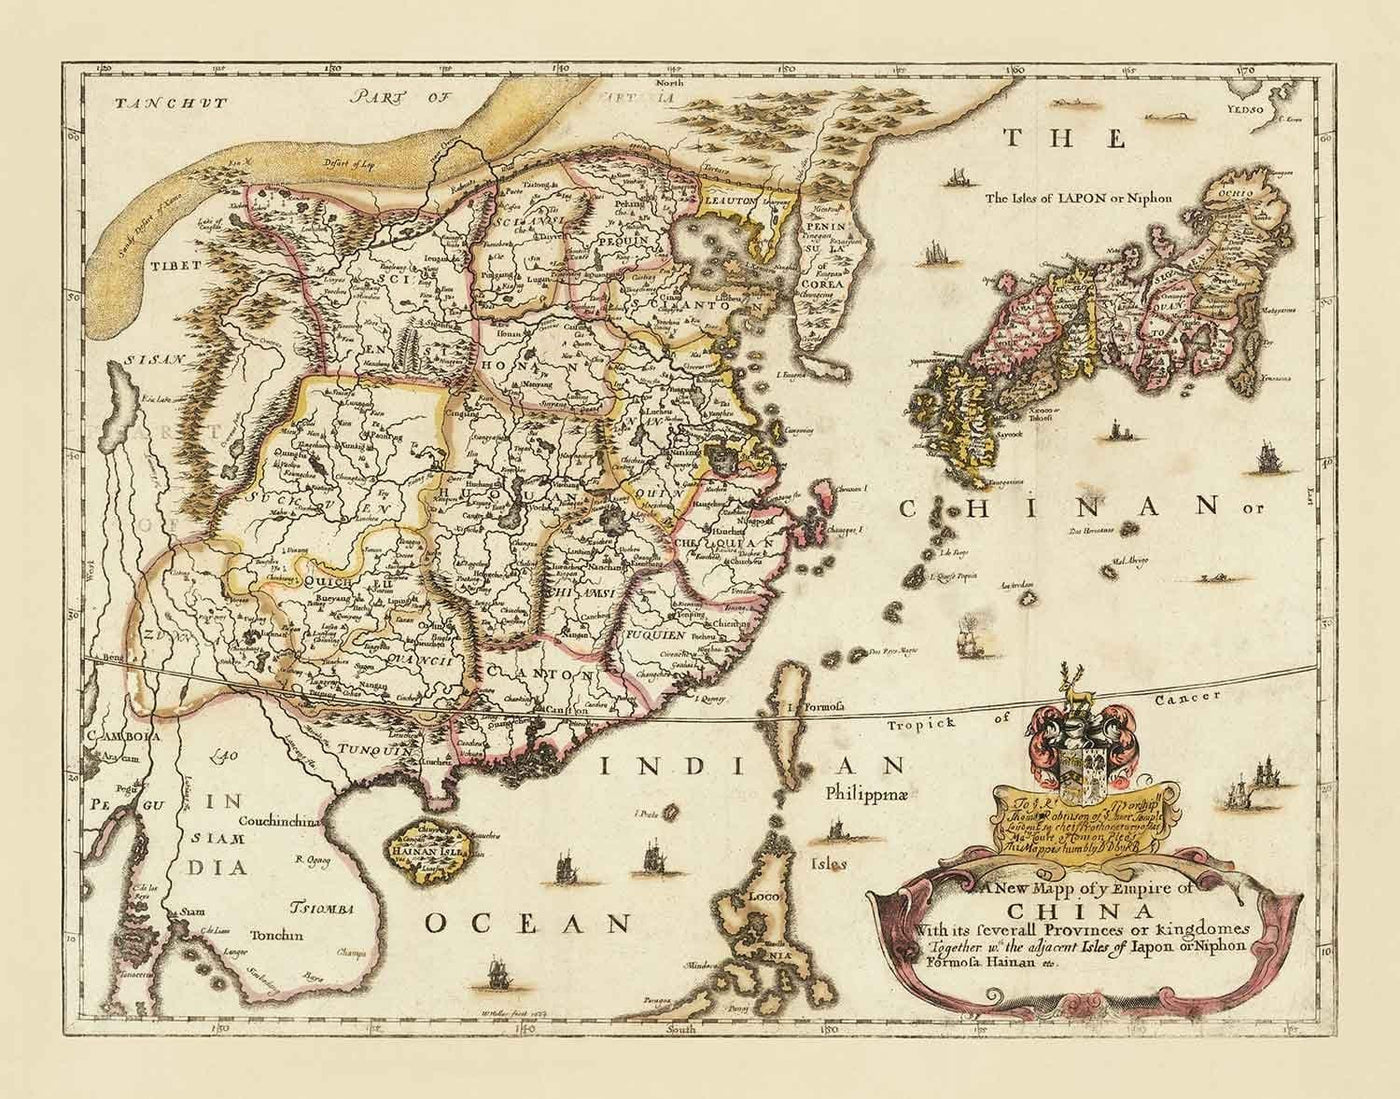 Old Map of China and East Asia, 1669 by Blome - Great Wall, Cantons, Korea, Japan, Vietnam, Thailand, Cambodia